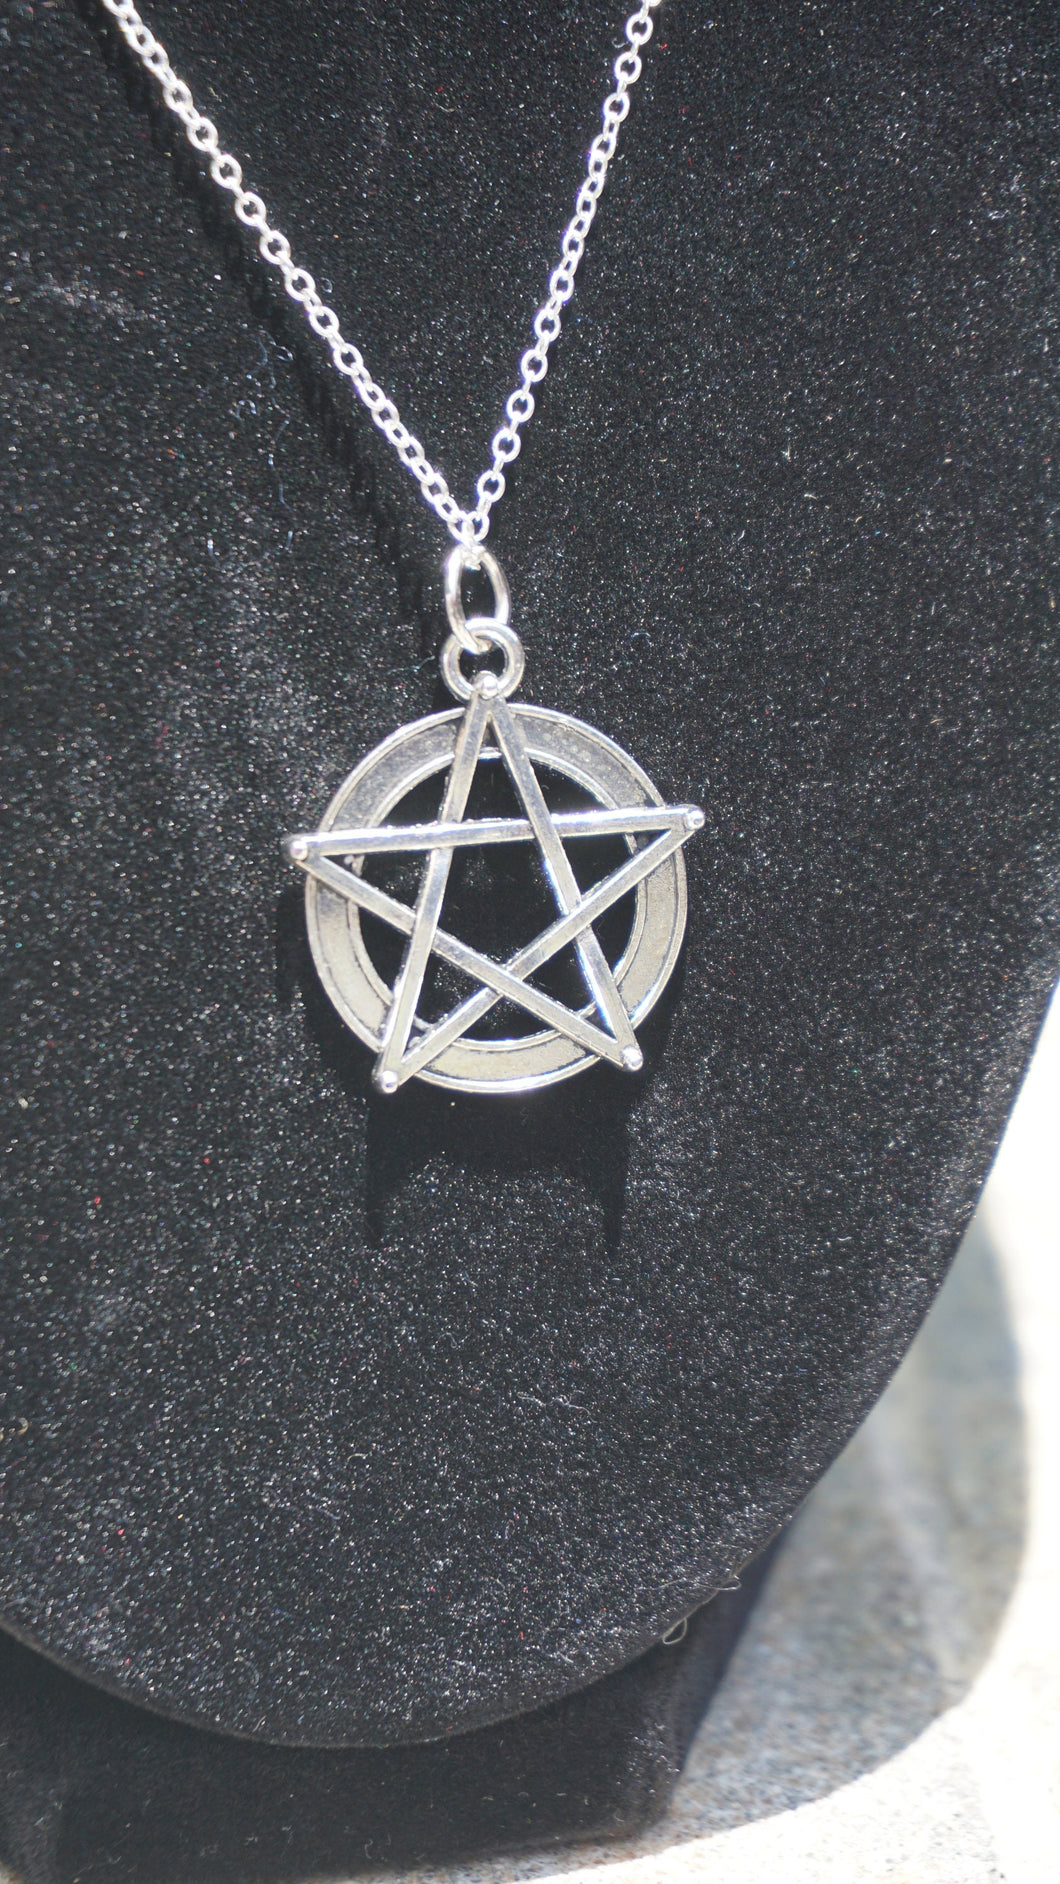 Pentacle Necklace 272| Pagan Pendant | Celtic | Wiccan | Spirituality | Protective necklace | Symbolism | Witchcraft Necklace